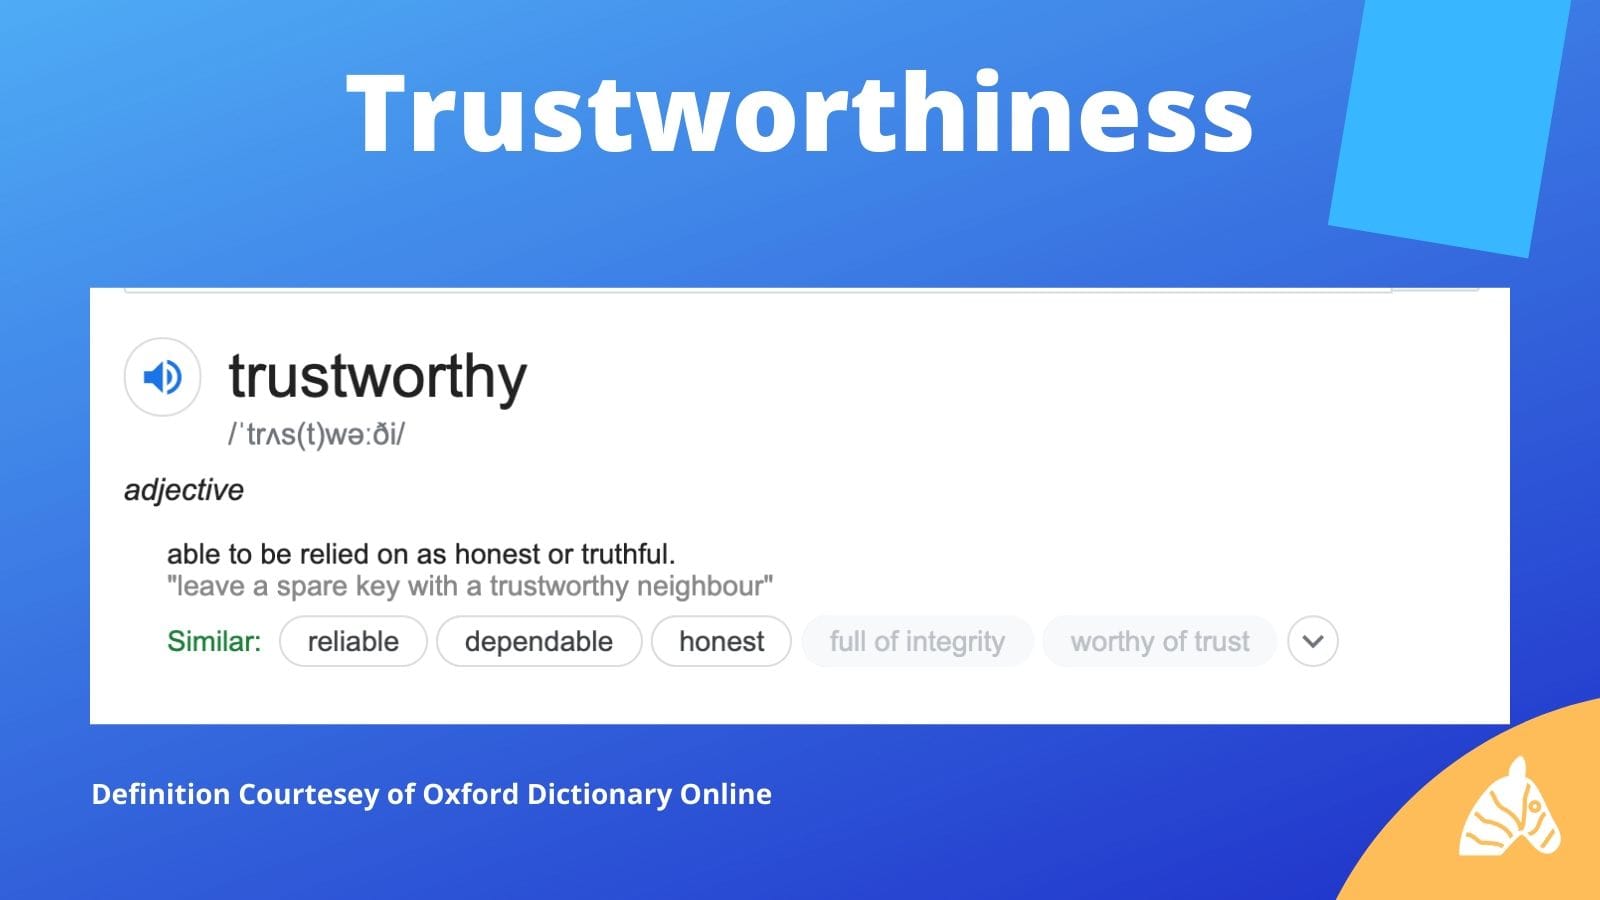 trustworthiness in the context of E-A-T acronym